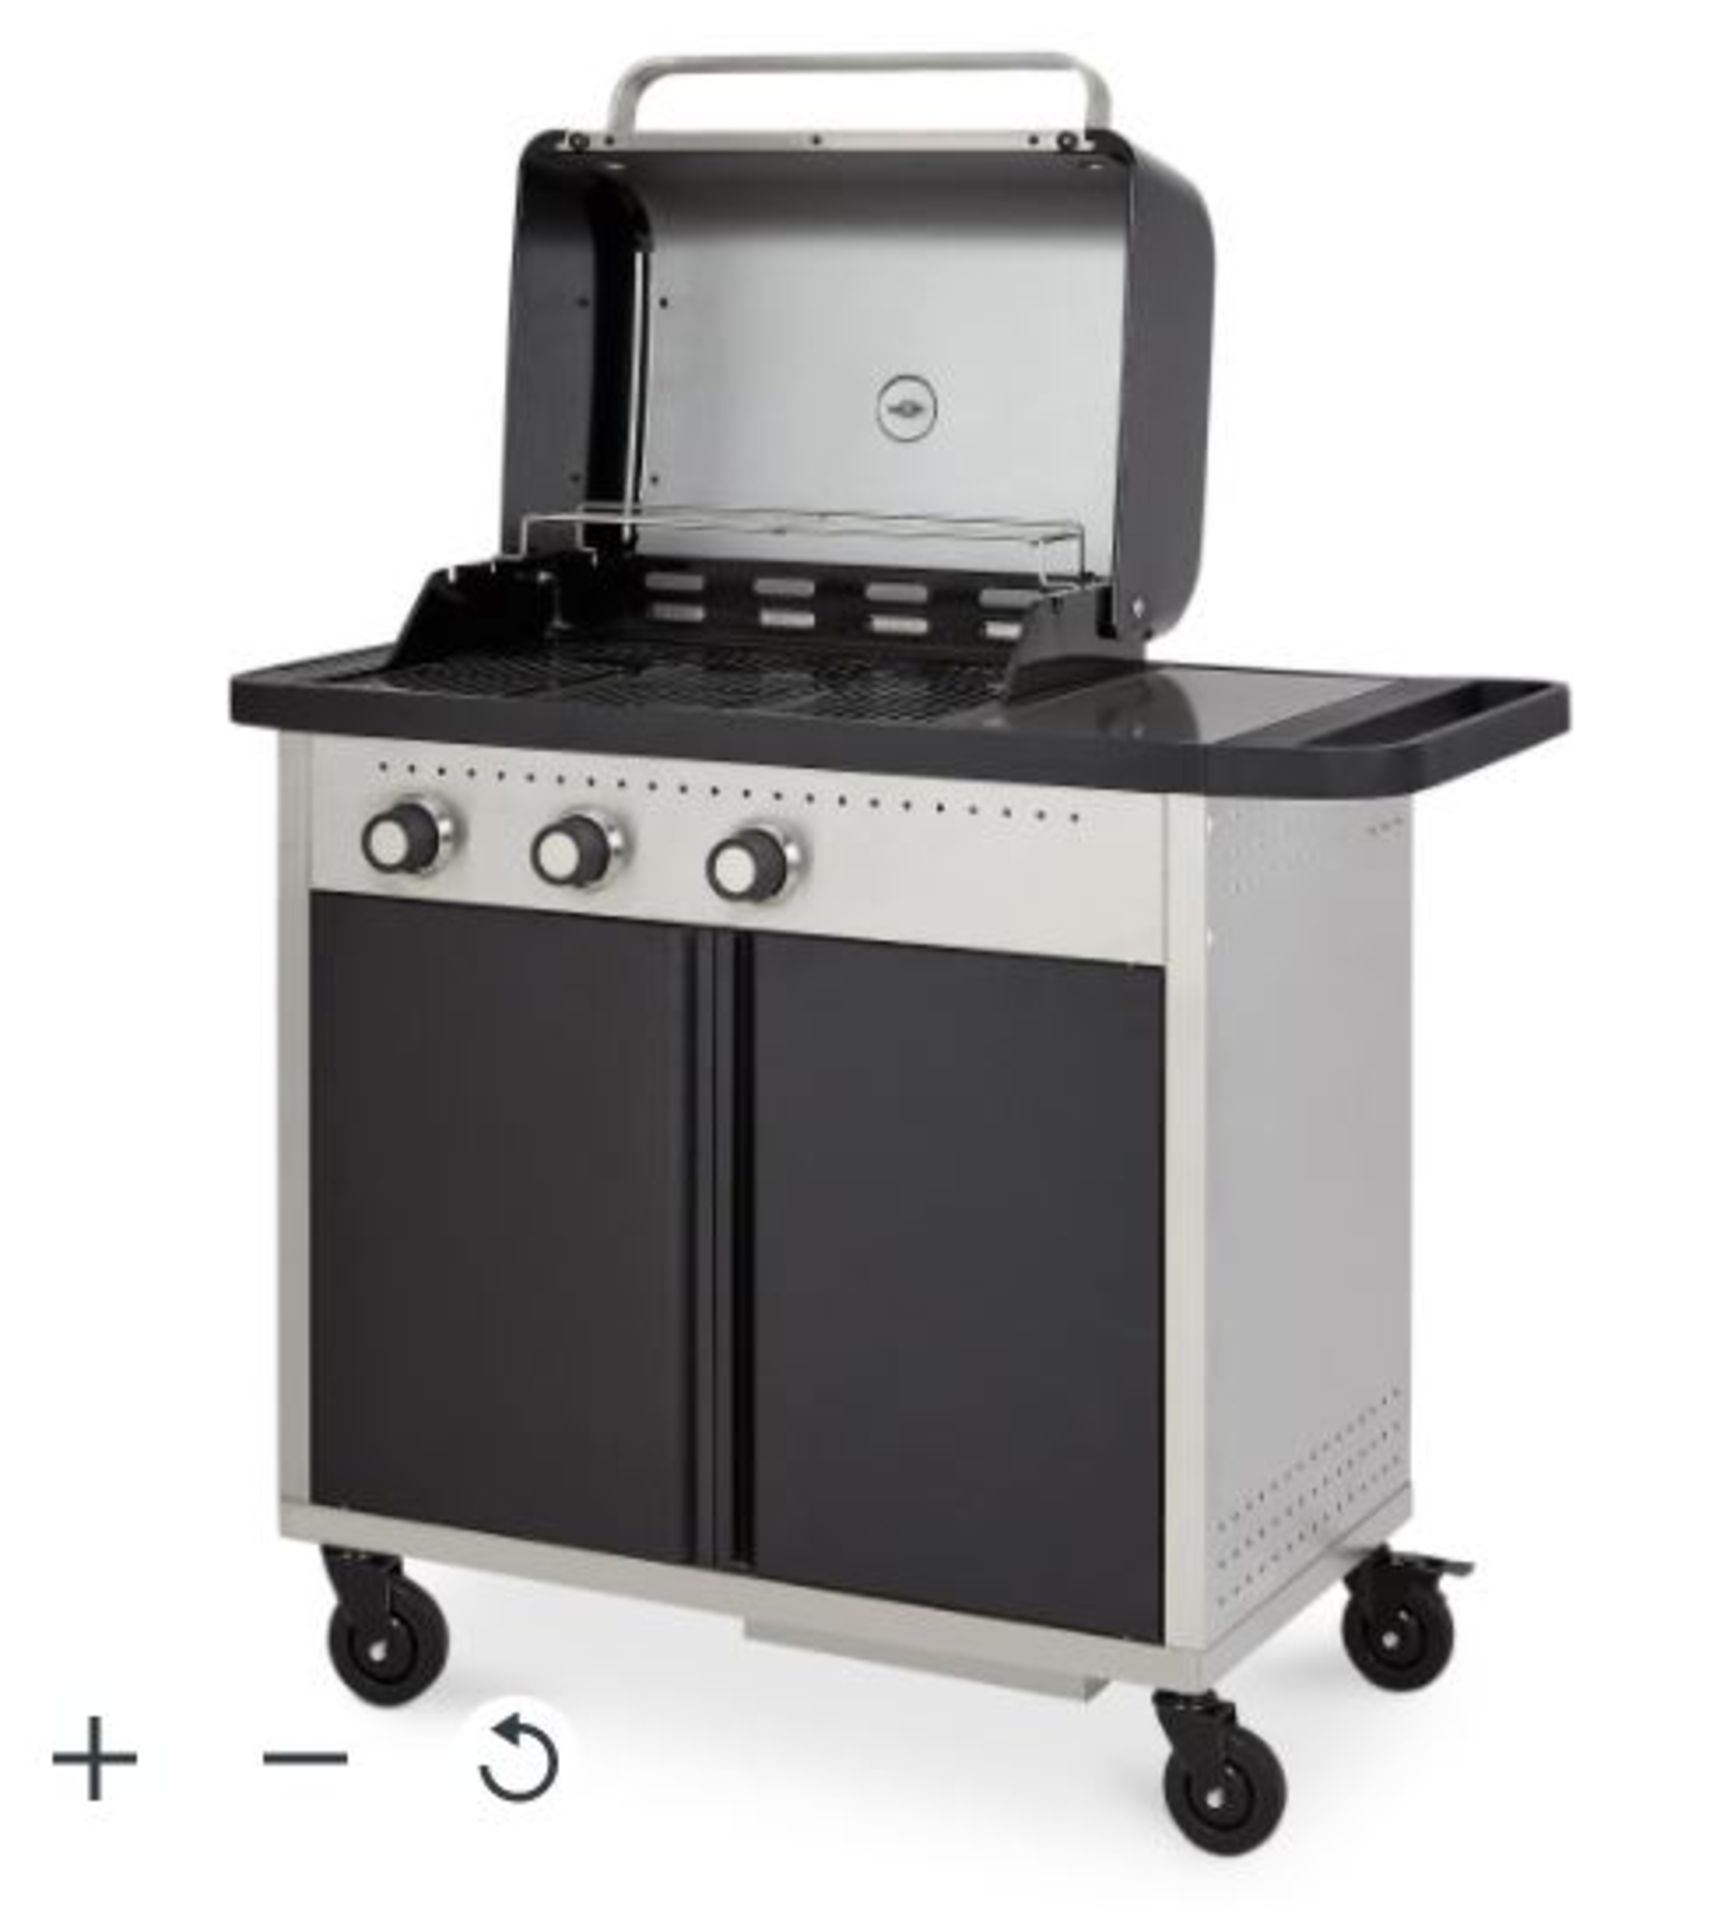 NEW BOXED - Rockwell 310 3 burner Gas Black Barbecue. With dishwasher safe grills, integrated - Image 2 of 2